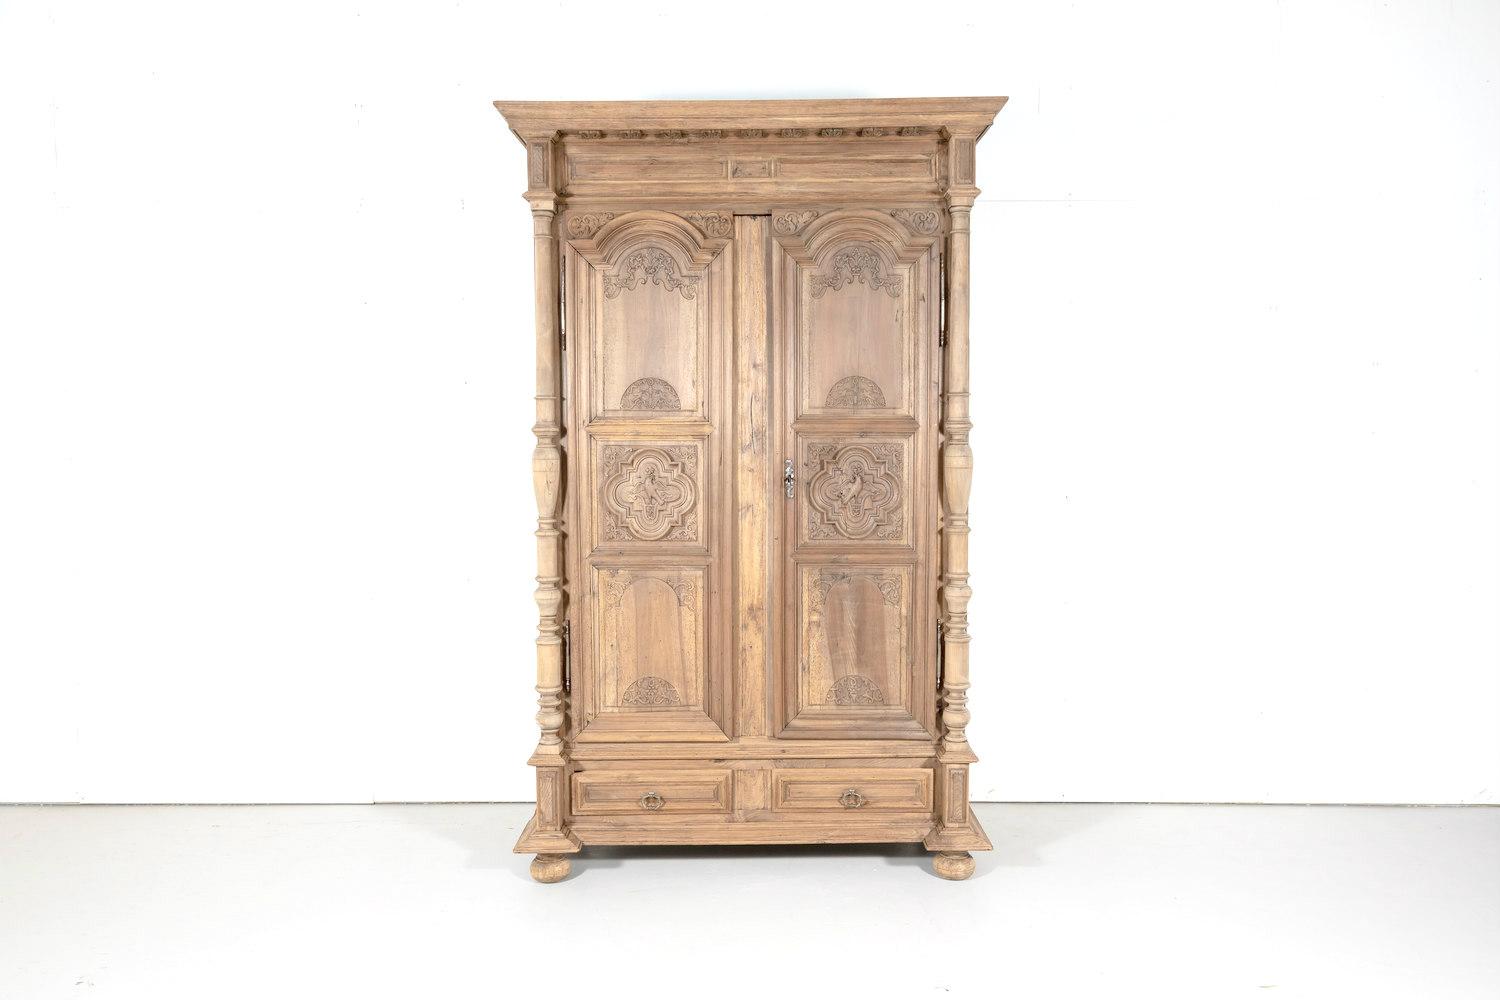 19th century French Louis XIII style armoire handcrafted in walnut by master artisans in Lyon, circa 1880s. The stepped out cornice of this handsome bleached armoire has stylized dentil moulding and sits atop a carved frieze. The raised and recessed